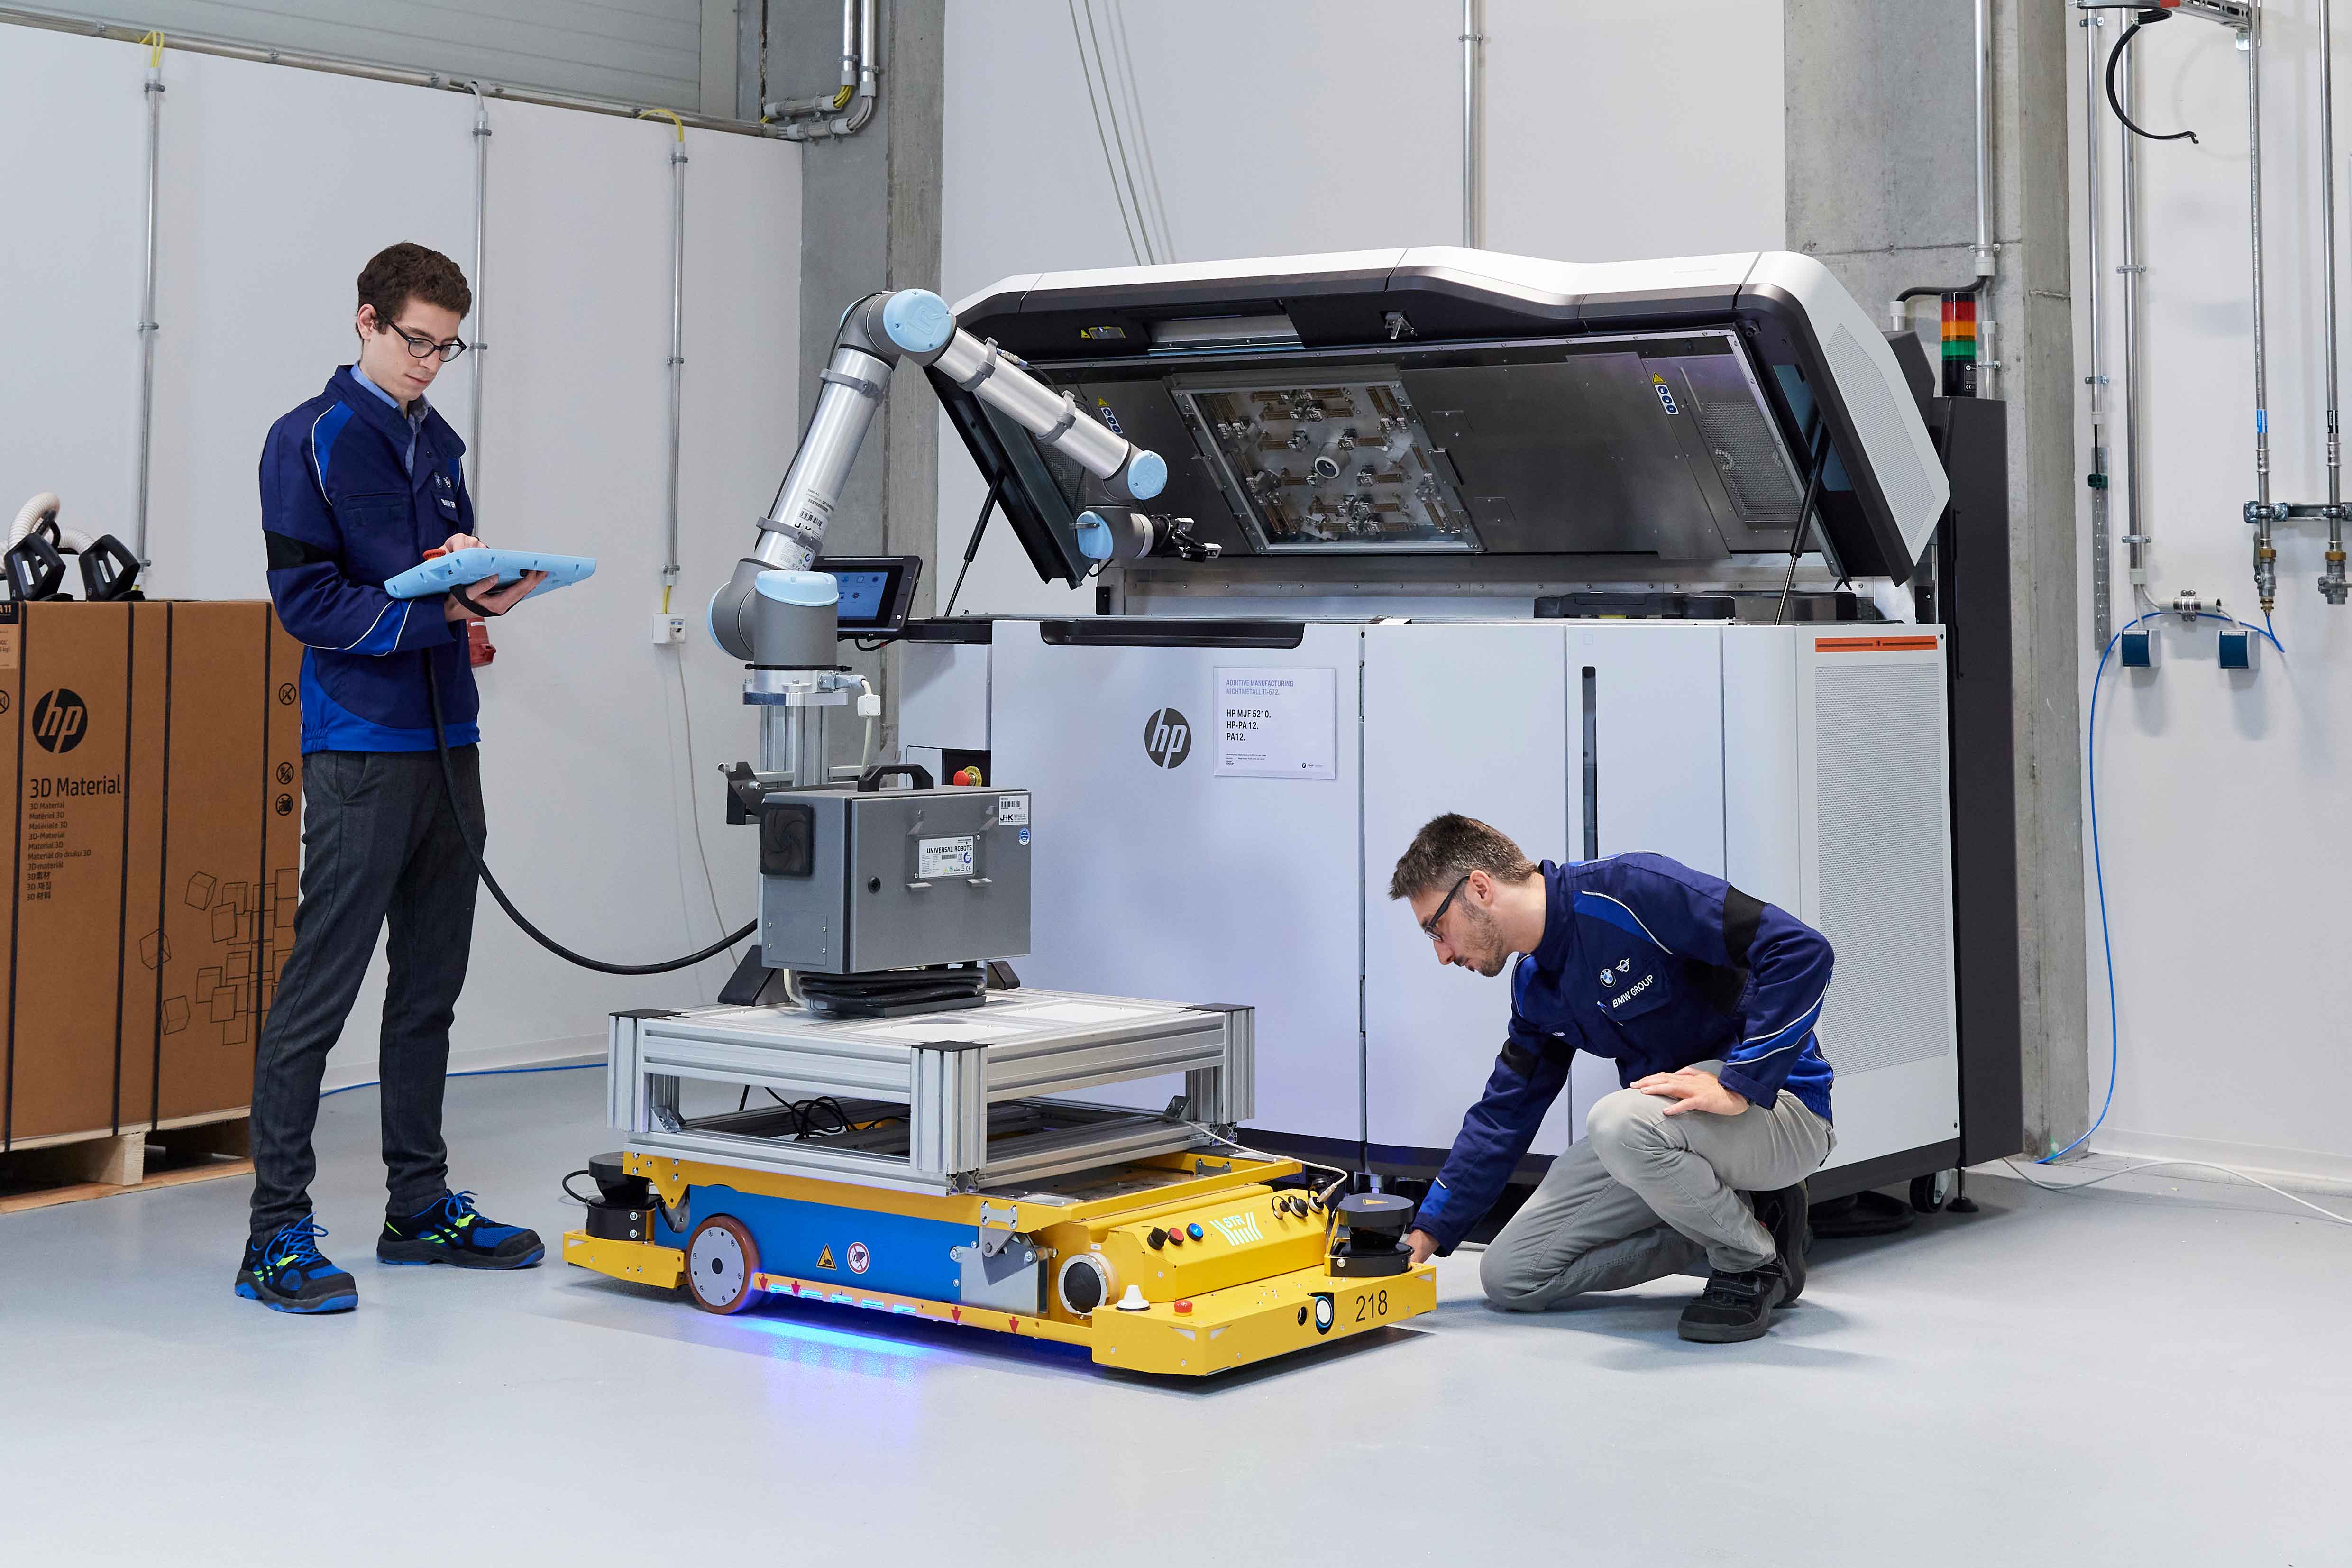 BMW Group builds on additive manufacturing, with skills consolidated at single site